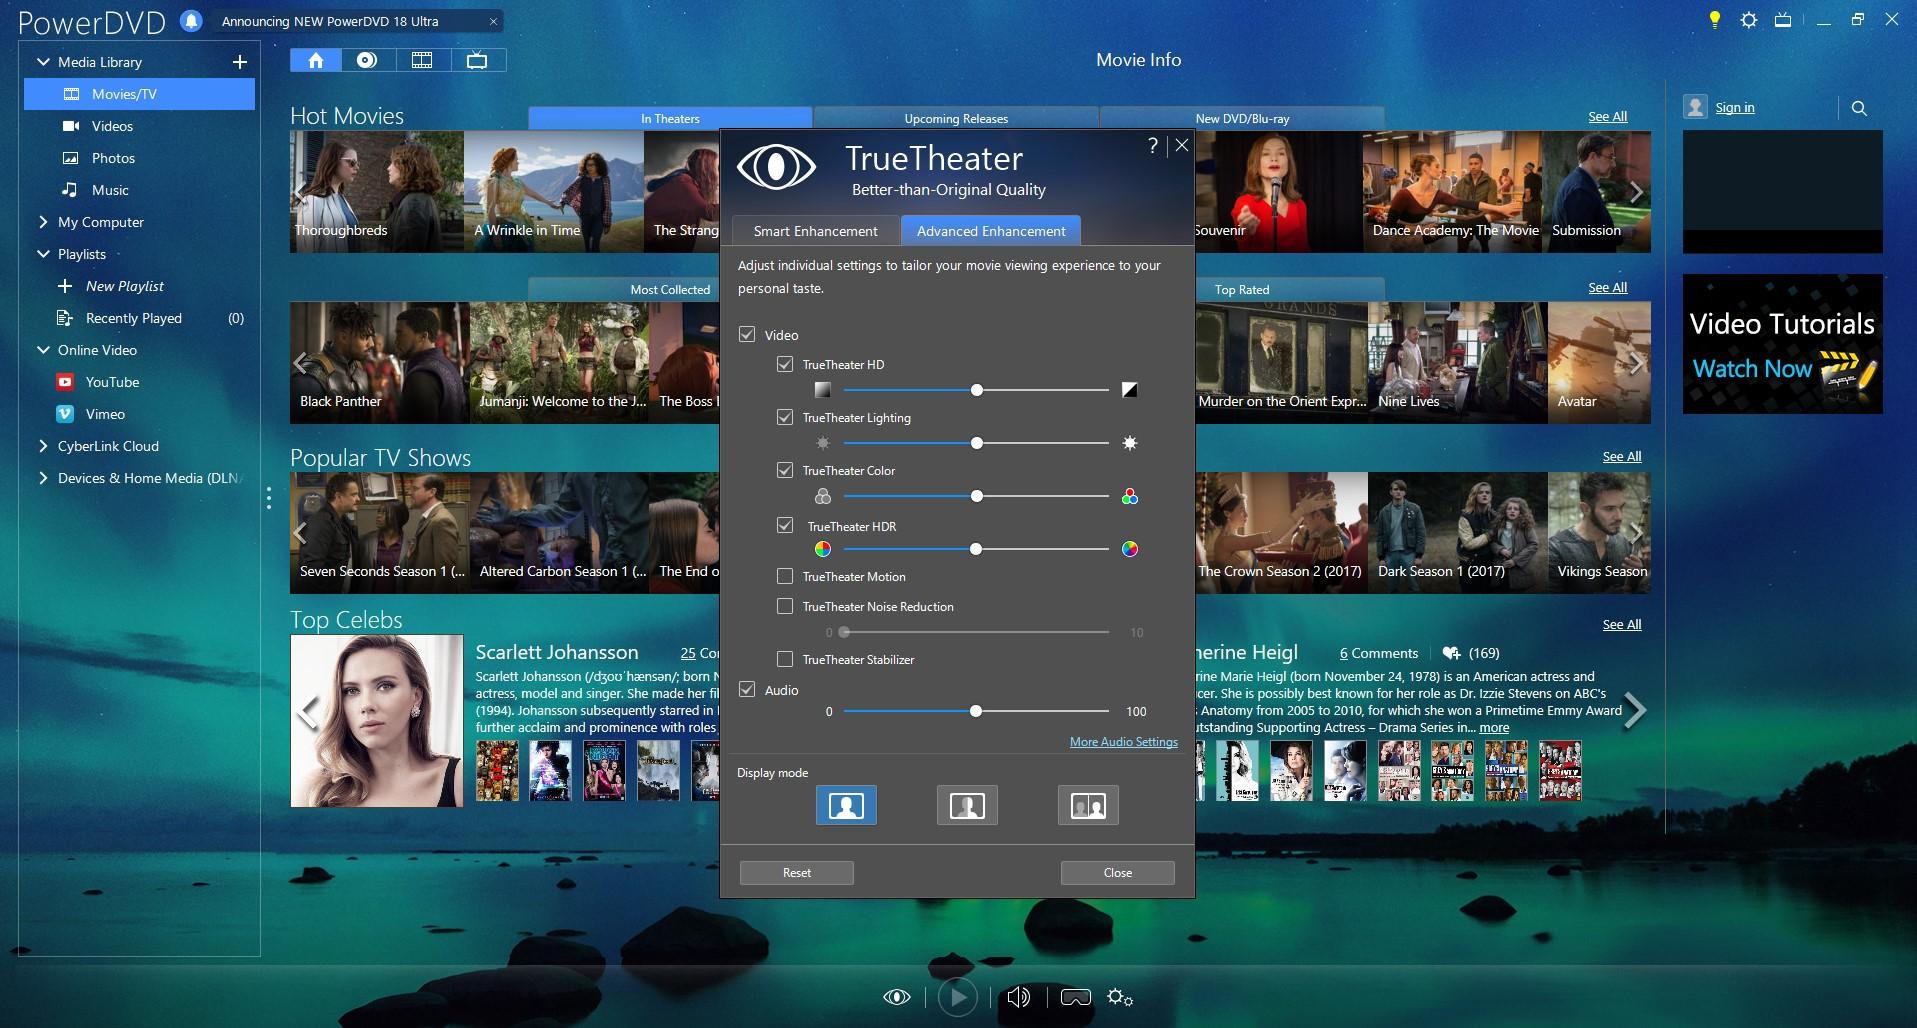 cyberlink movie player free download